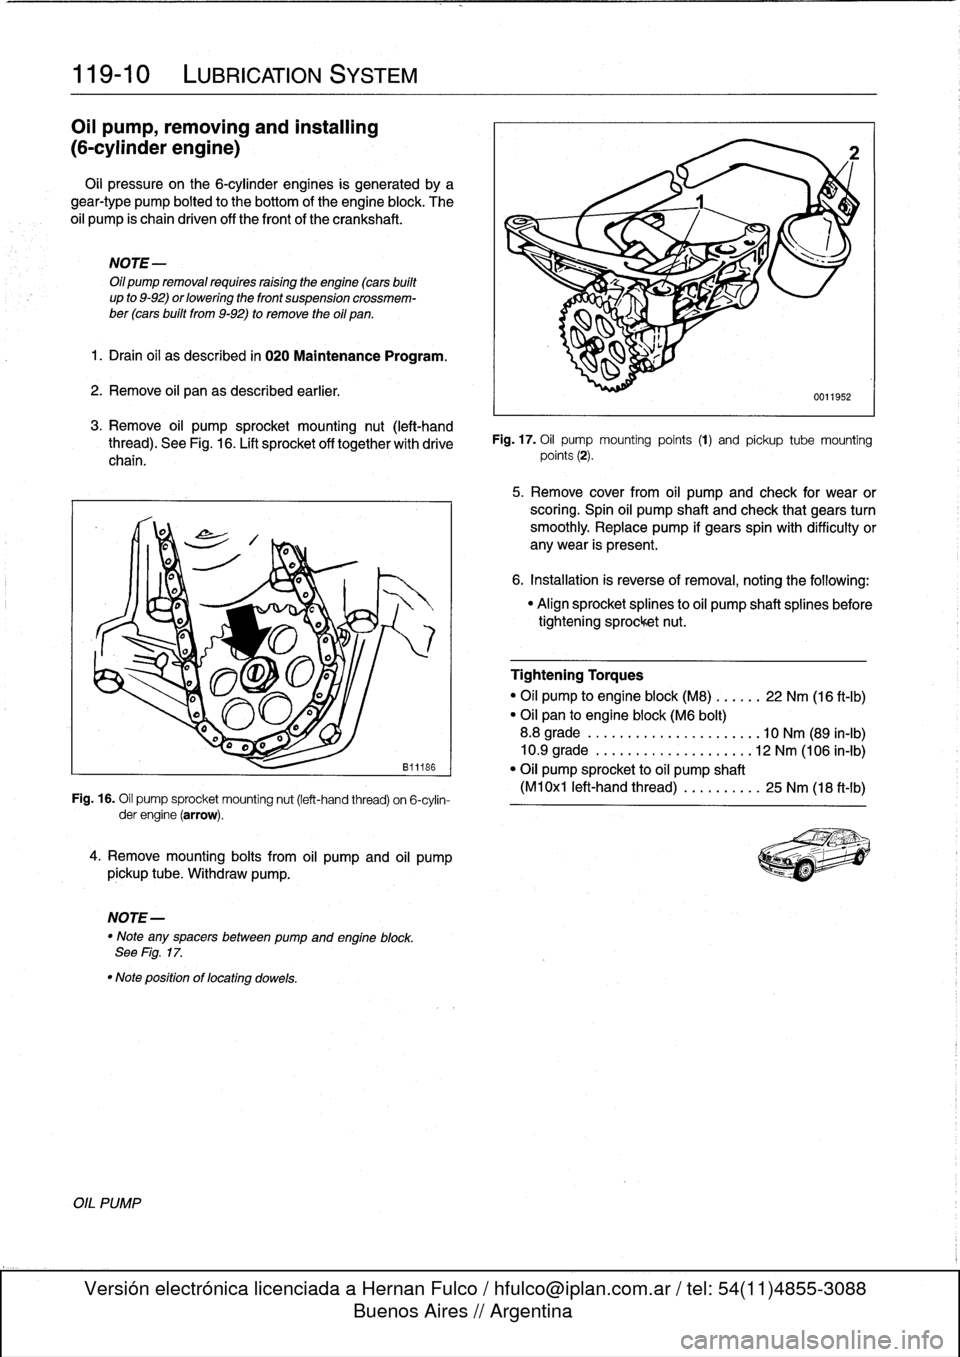 BMW 318i 1997 E36 Repair Manual 
119-
1
0

	

LUBRICATION
SYSTEM

Oil
pump,
removing
and
installing

(6-cylinder
engine)

Oil
pressure
on
the
6-cylinder
engines
is
generated
by
a
gear-type
pump
bolted
to
the
bottom
of
the
engine
blo